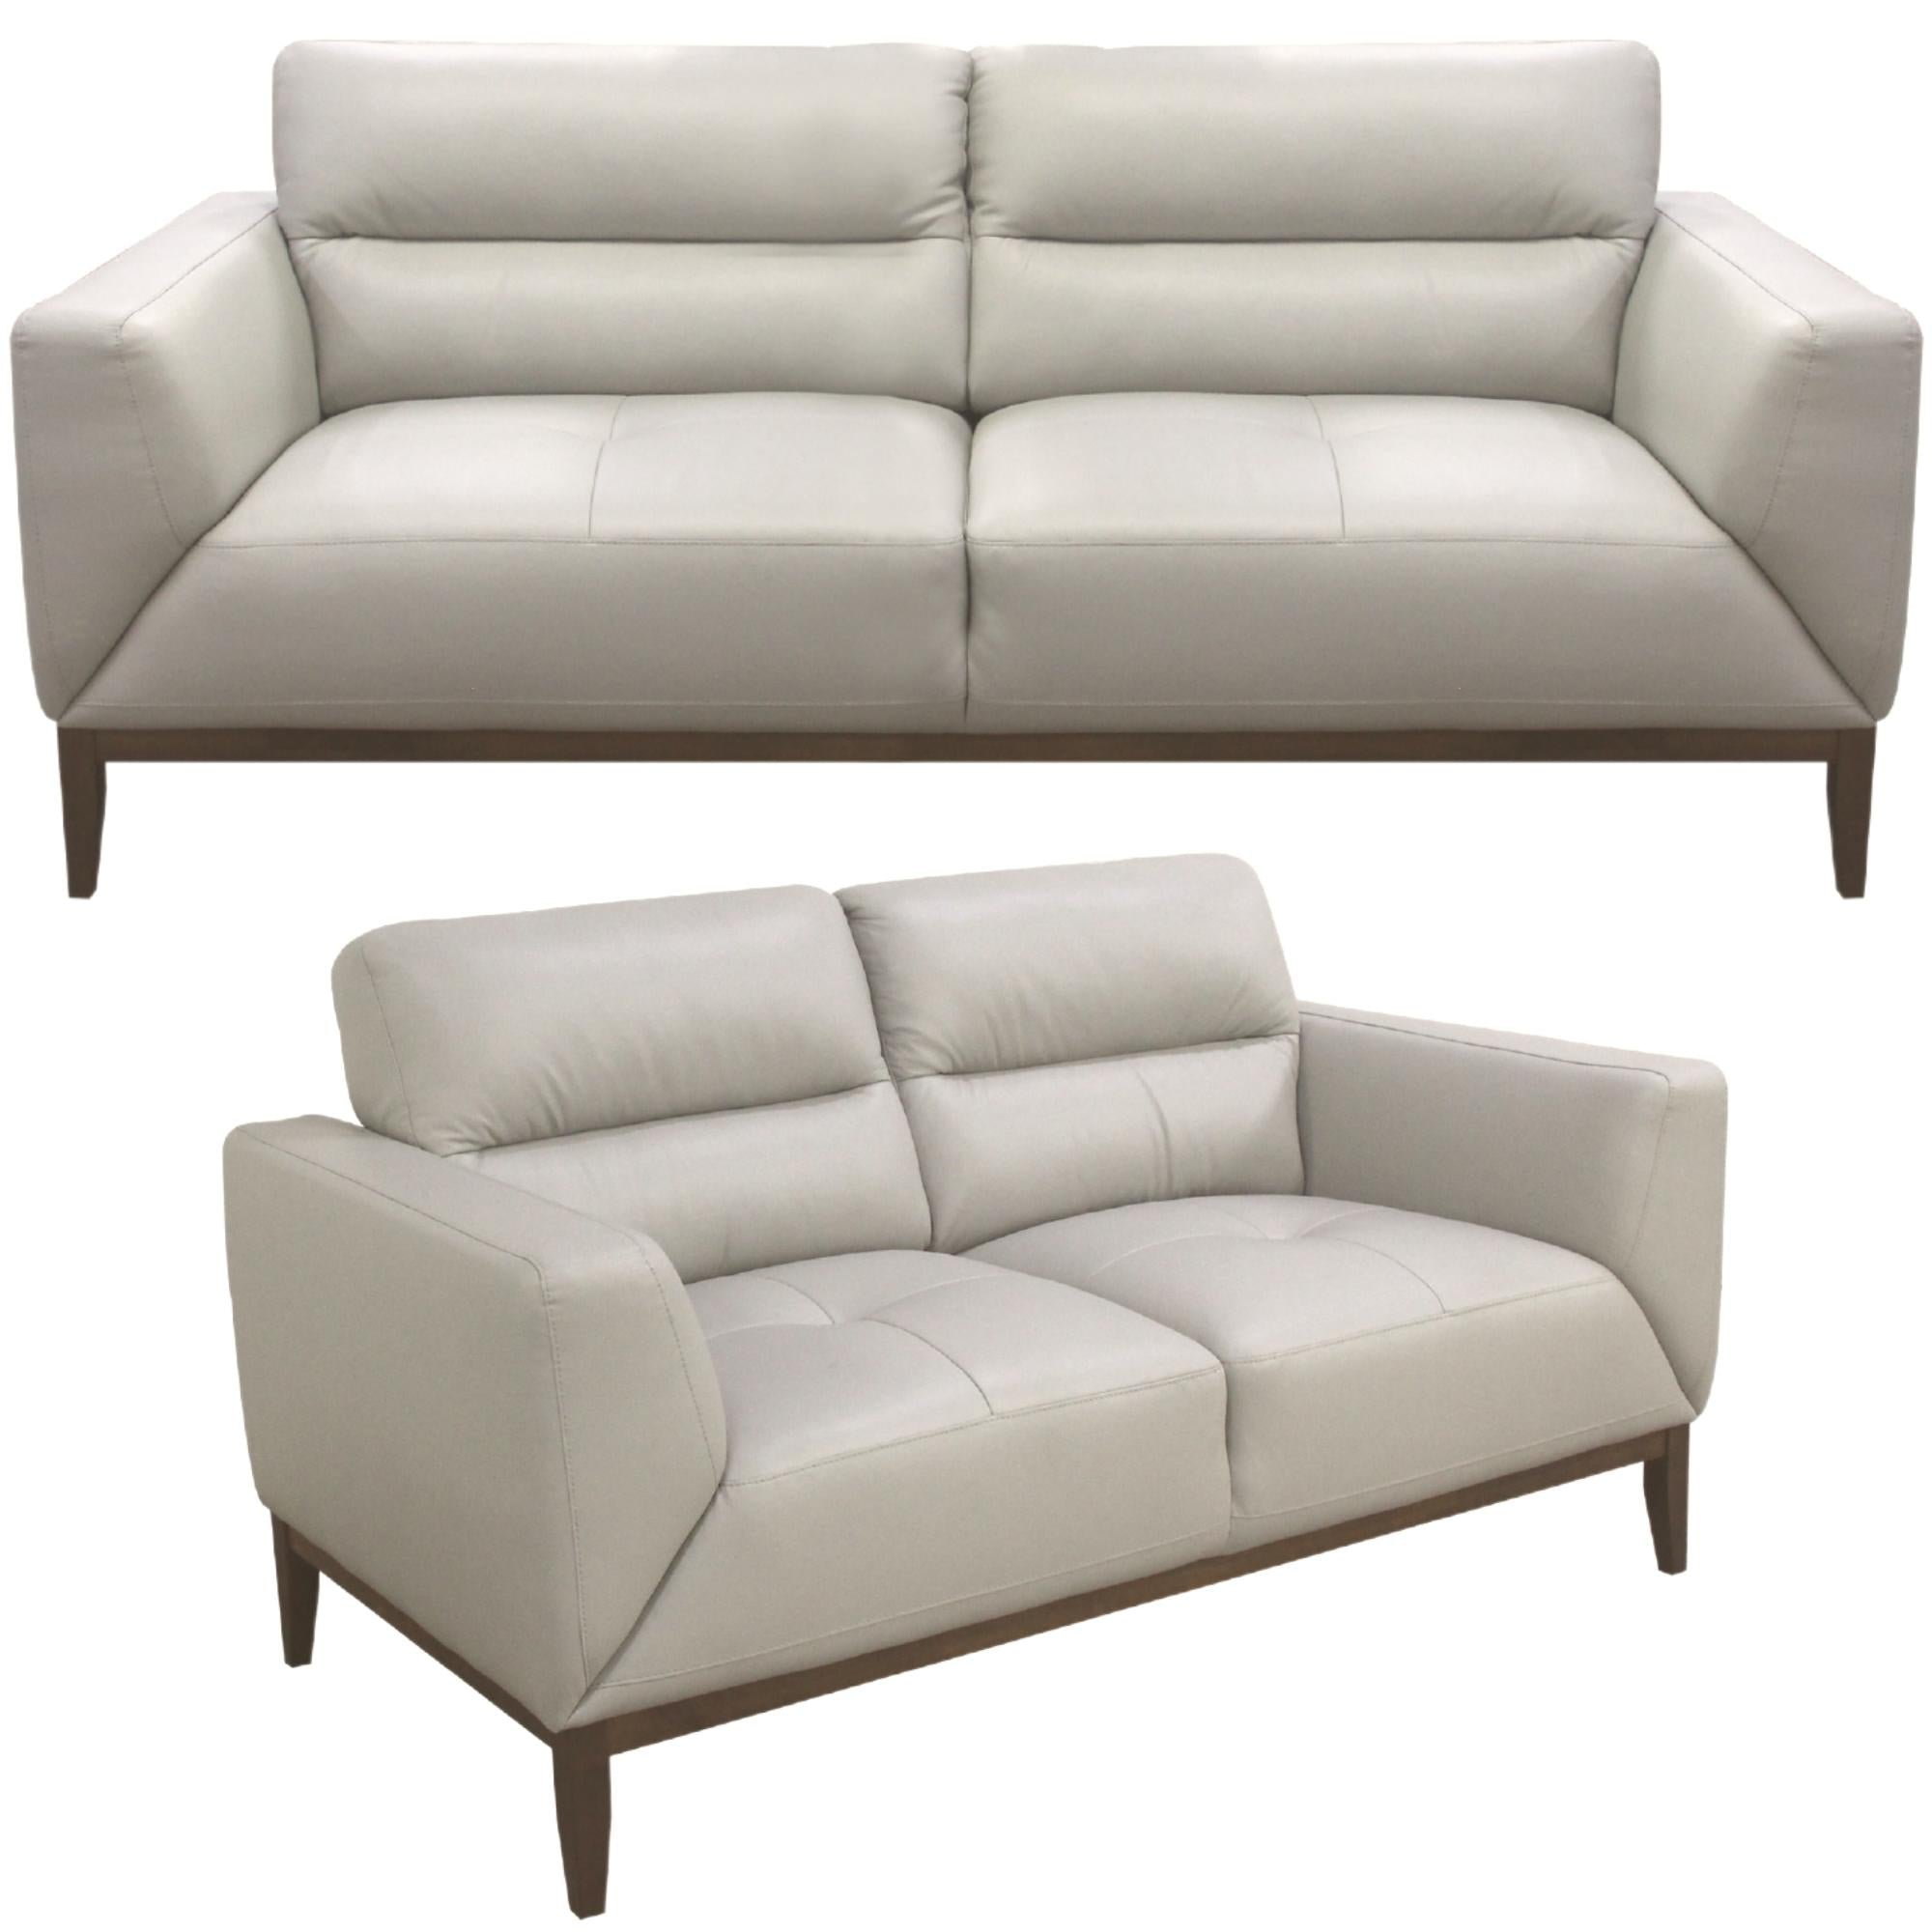 Downy  Genuine Leather Sofa Set 3 + 2 Seater Upholstered Lounge Couch - Silver